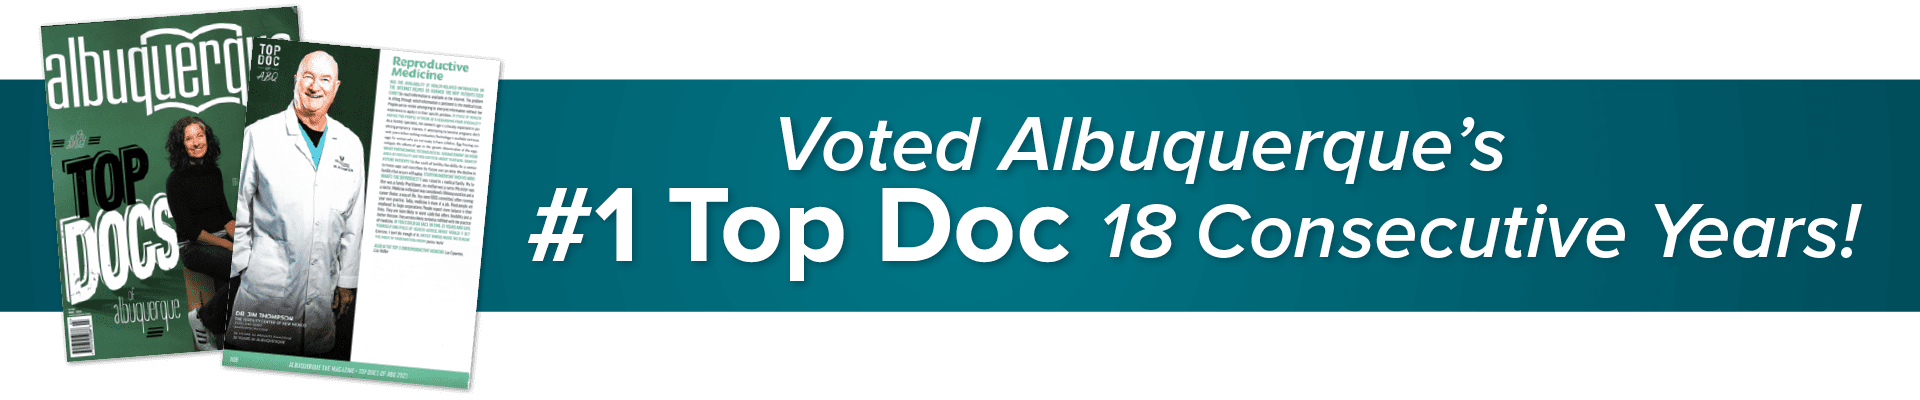 Voted Albuquerque's #1 Top Doc for 18 Consecutive Years!